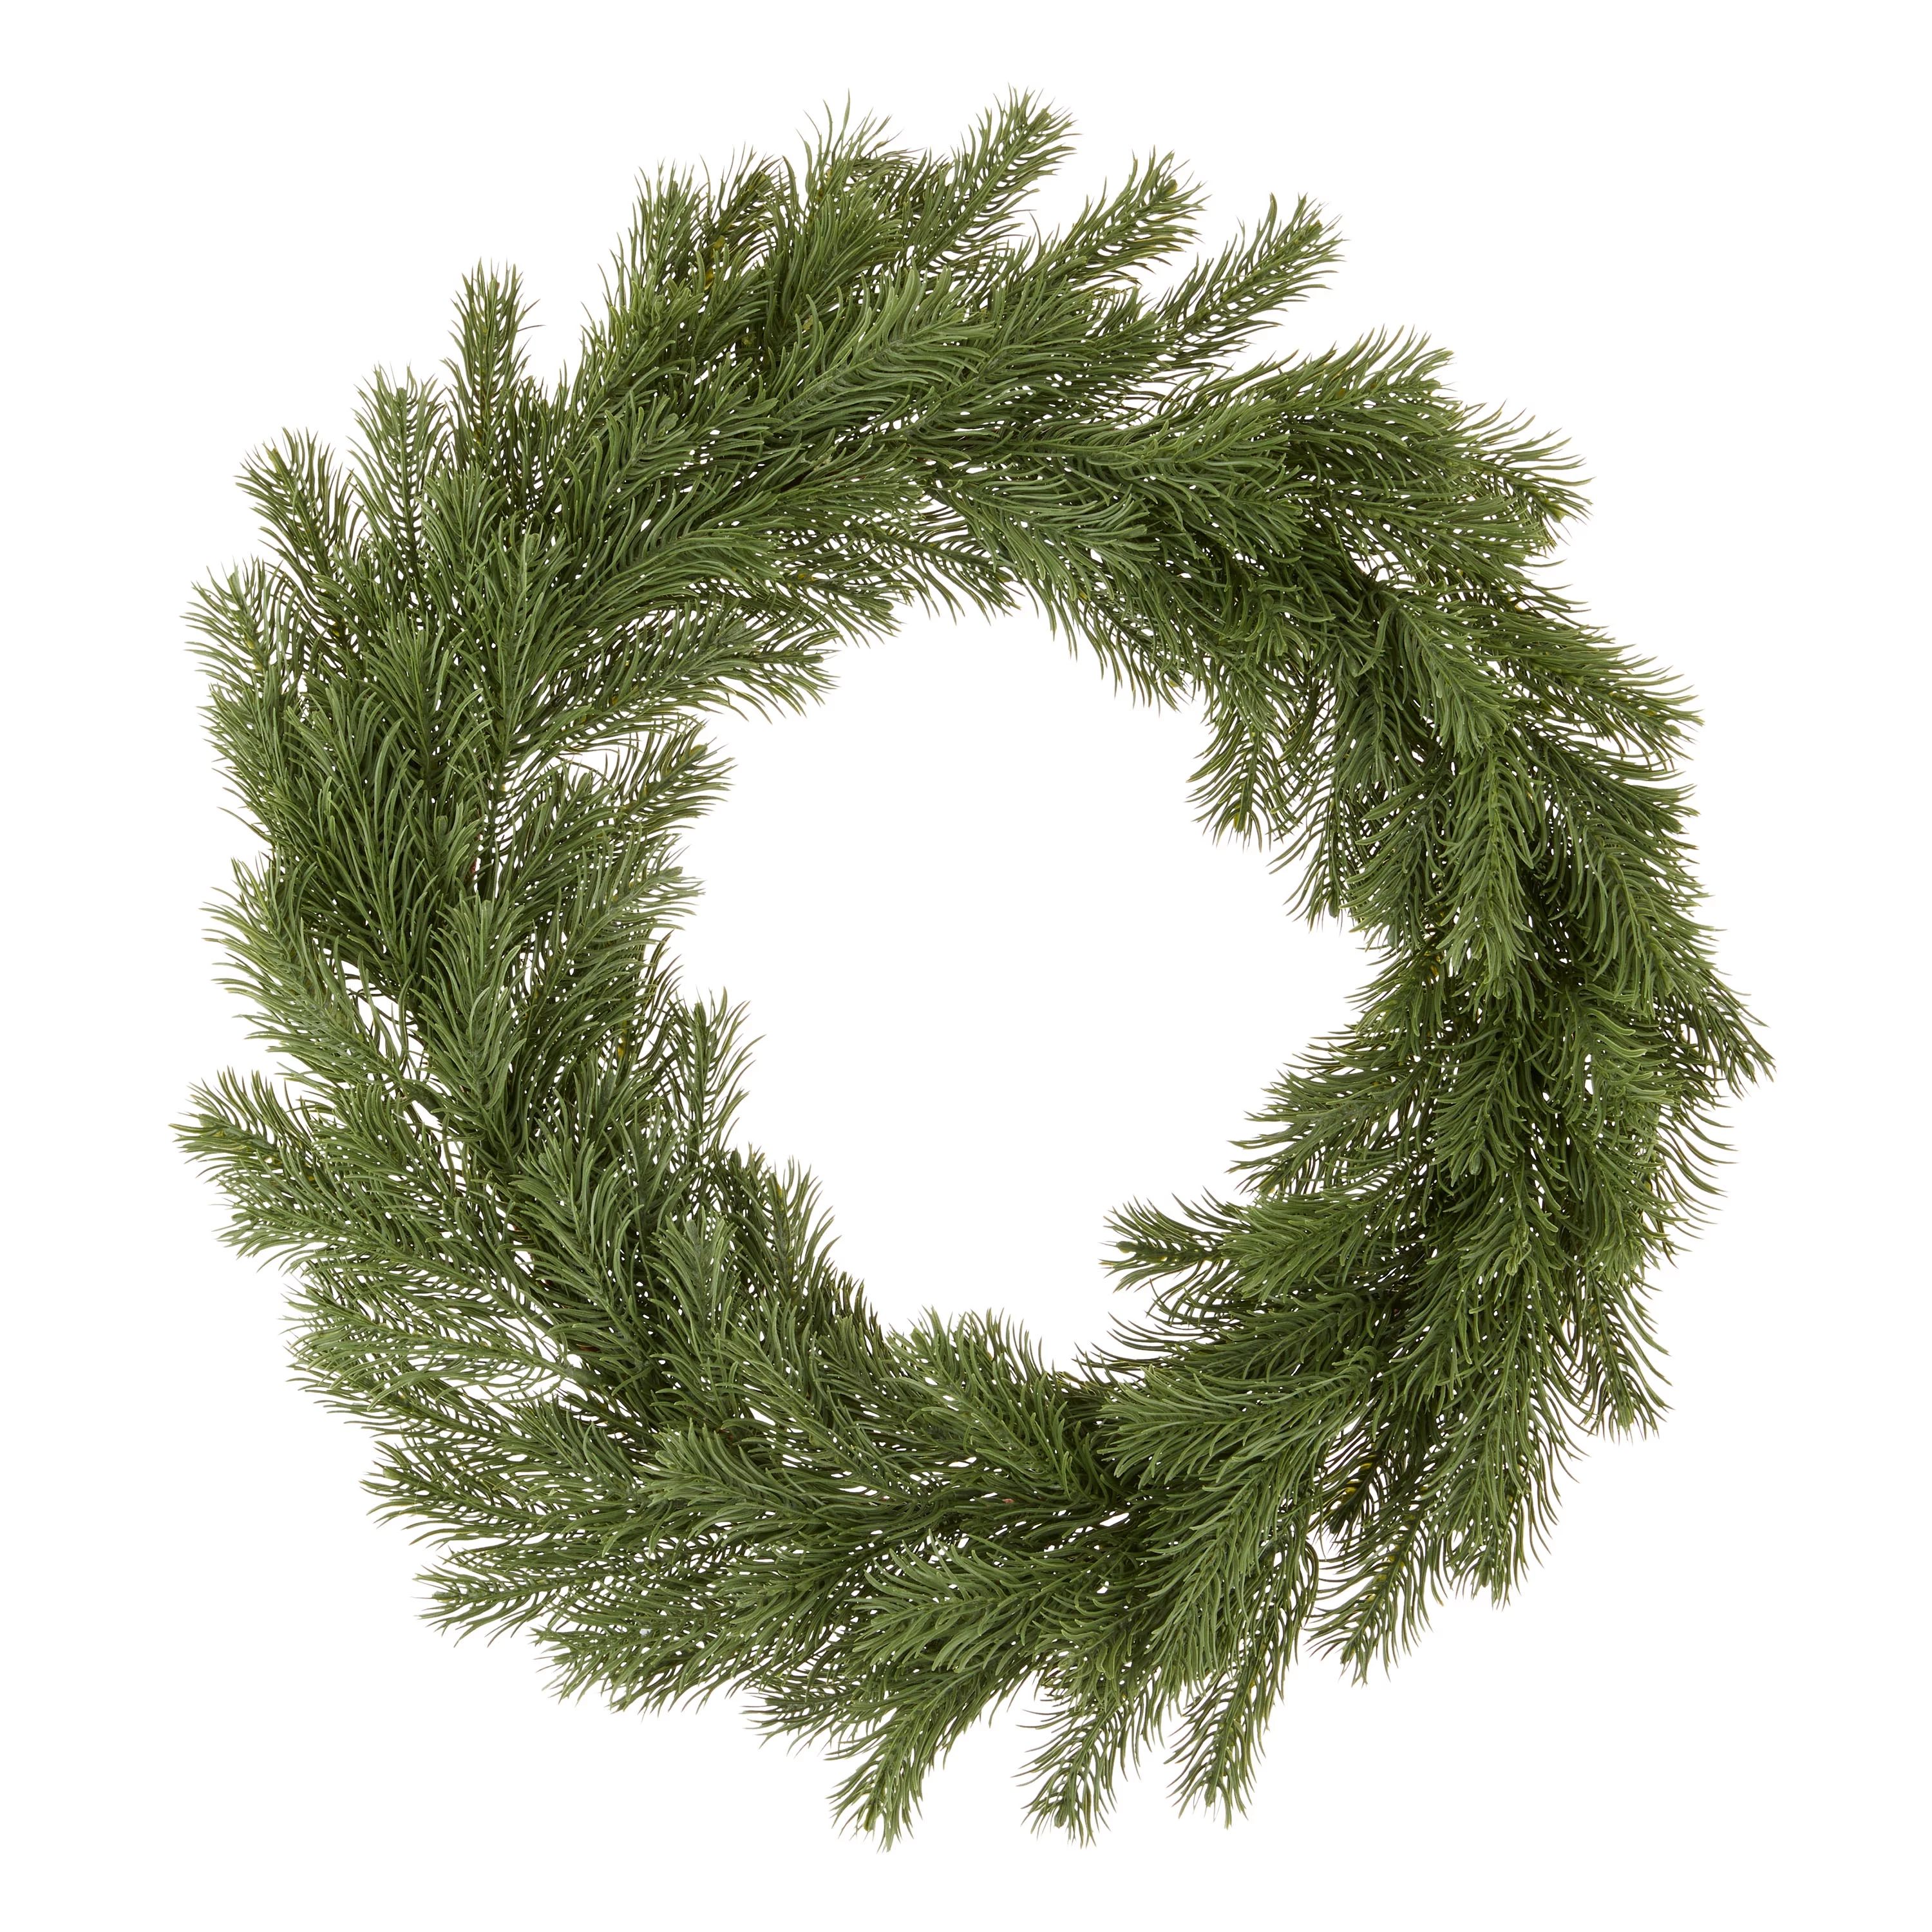 Greenery Artificial Christmas Wreath, 24 in x 24 in, by Holiday Time | Walmart (US)